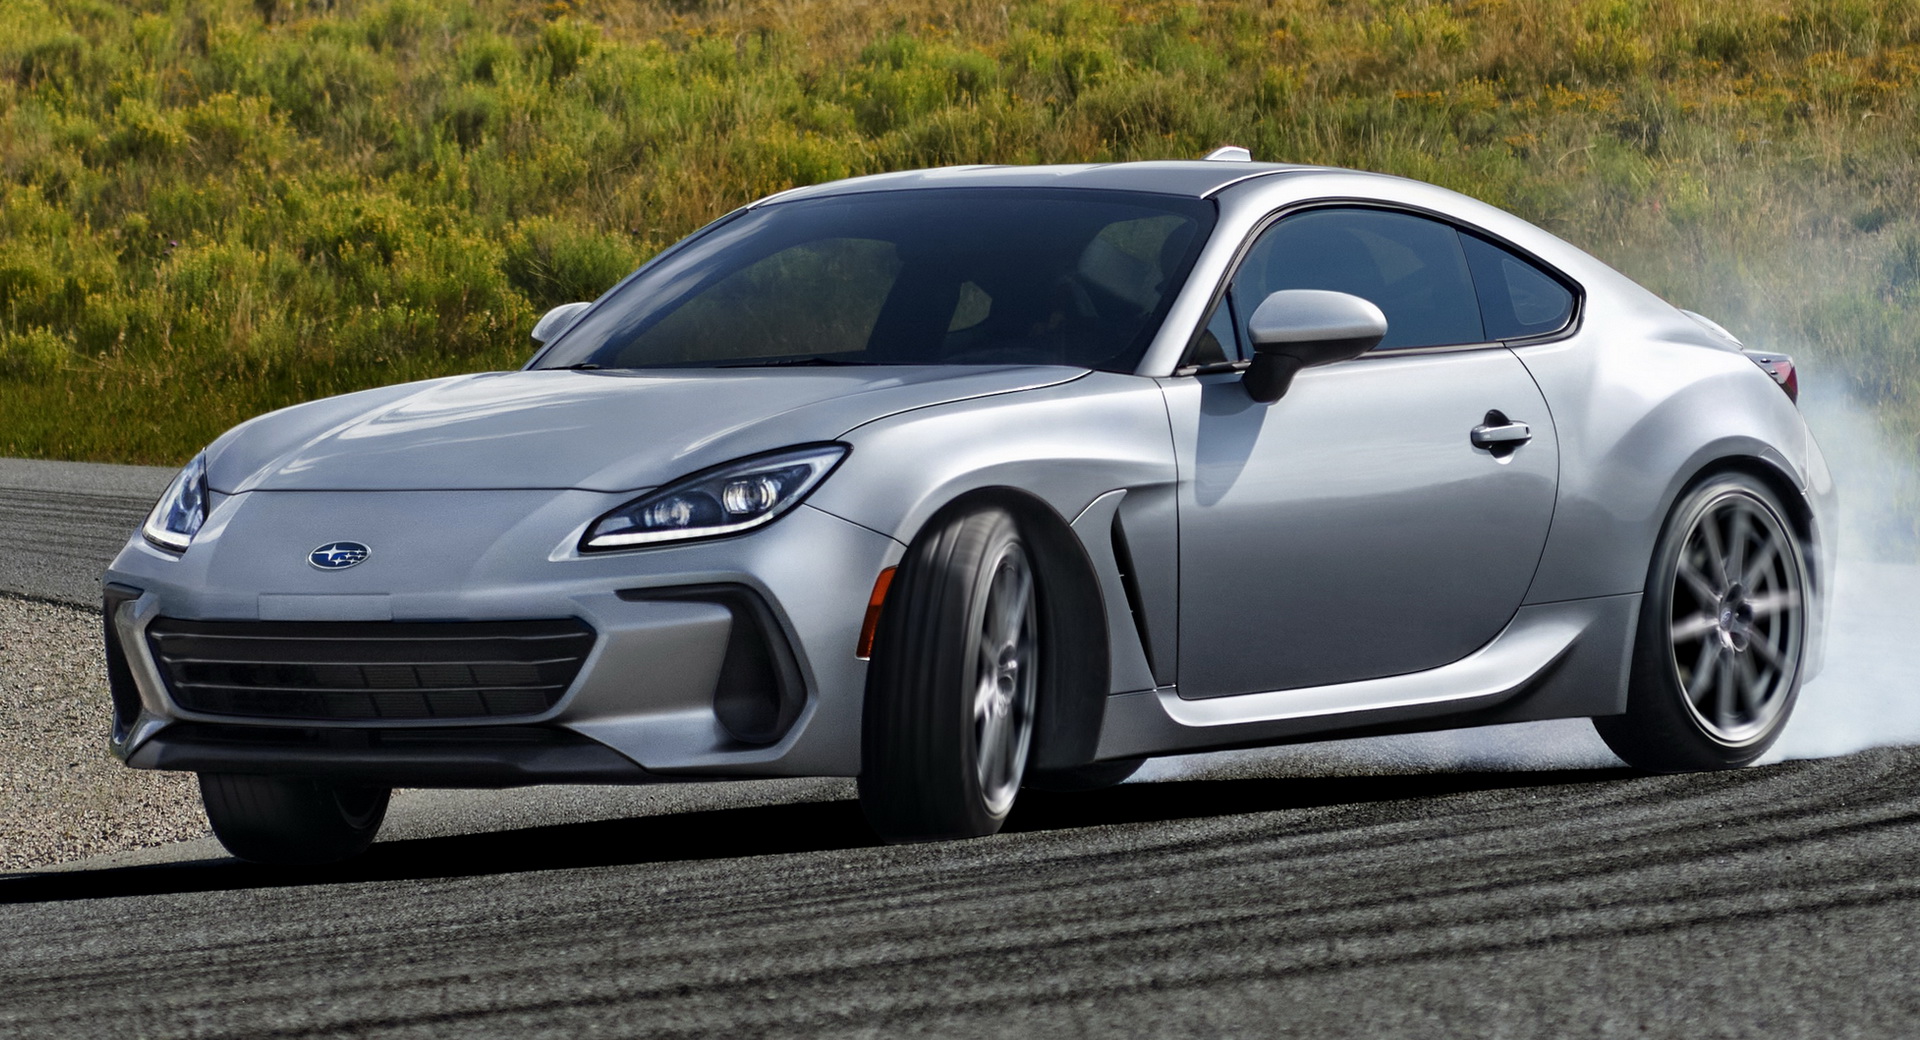 New Subaru BRZ launches with more power and torque